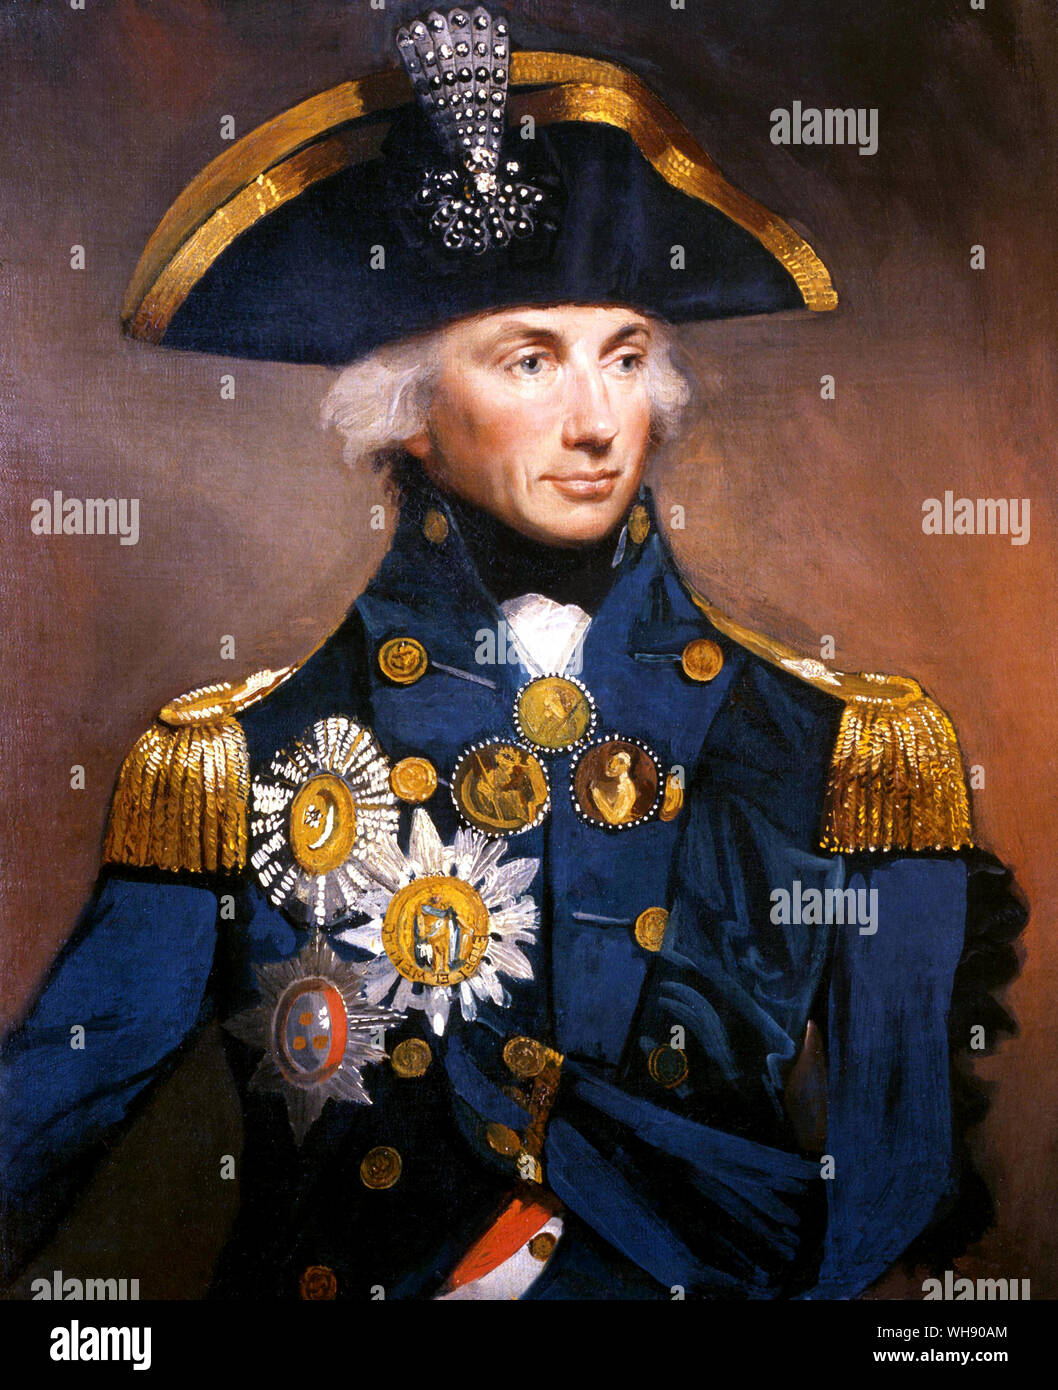 Lord Horatio Nelson by Abbott. In his hat he wears the Plume of Triumph sent to him by the Sultan of Turkey in gratitude for saving Egypt (then a Turkish province) from the French.. . Stock Photo